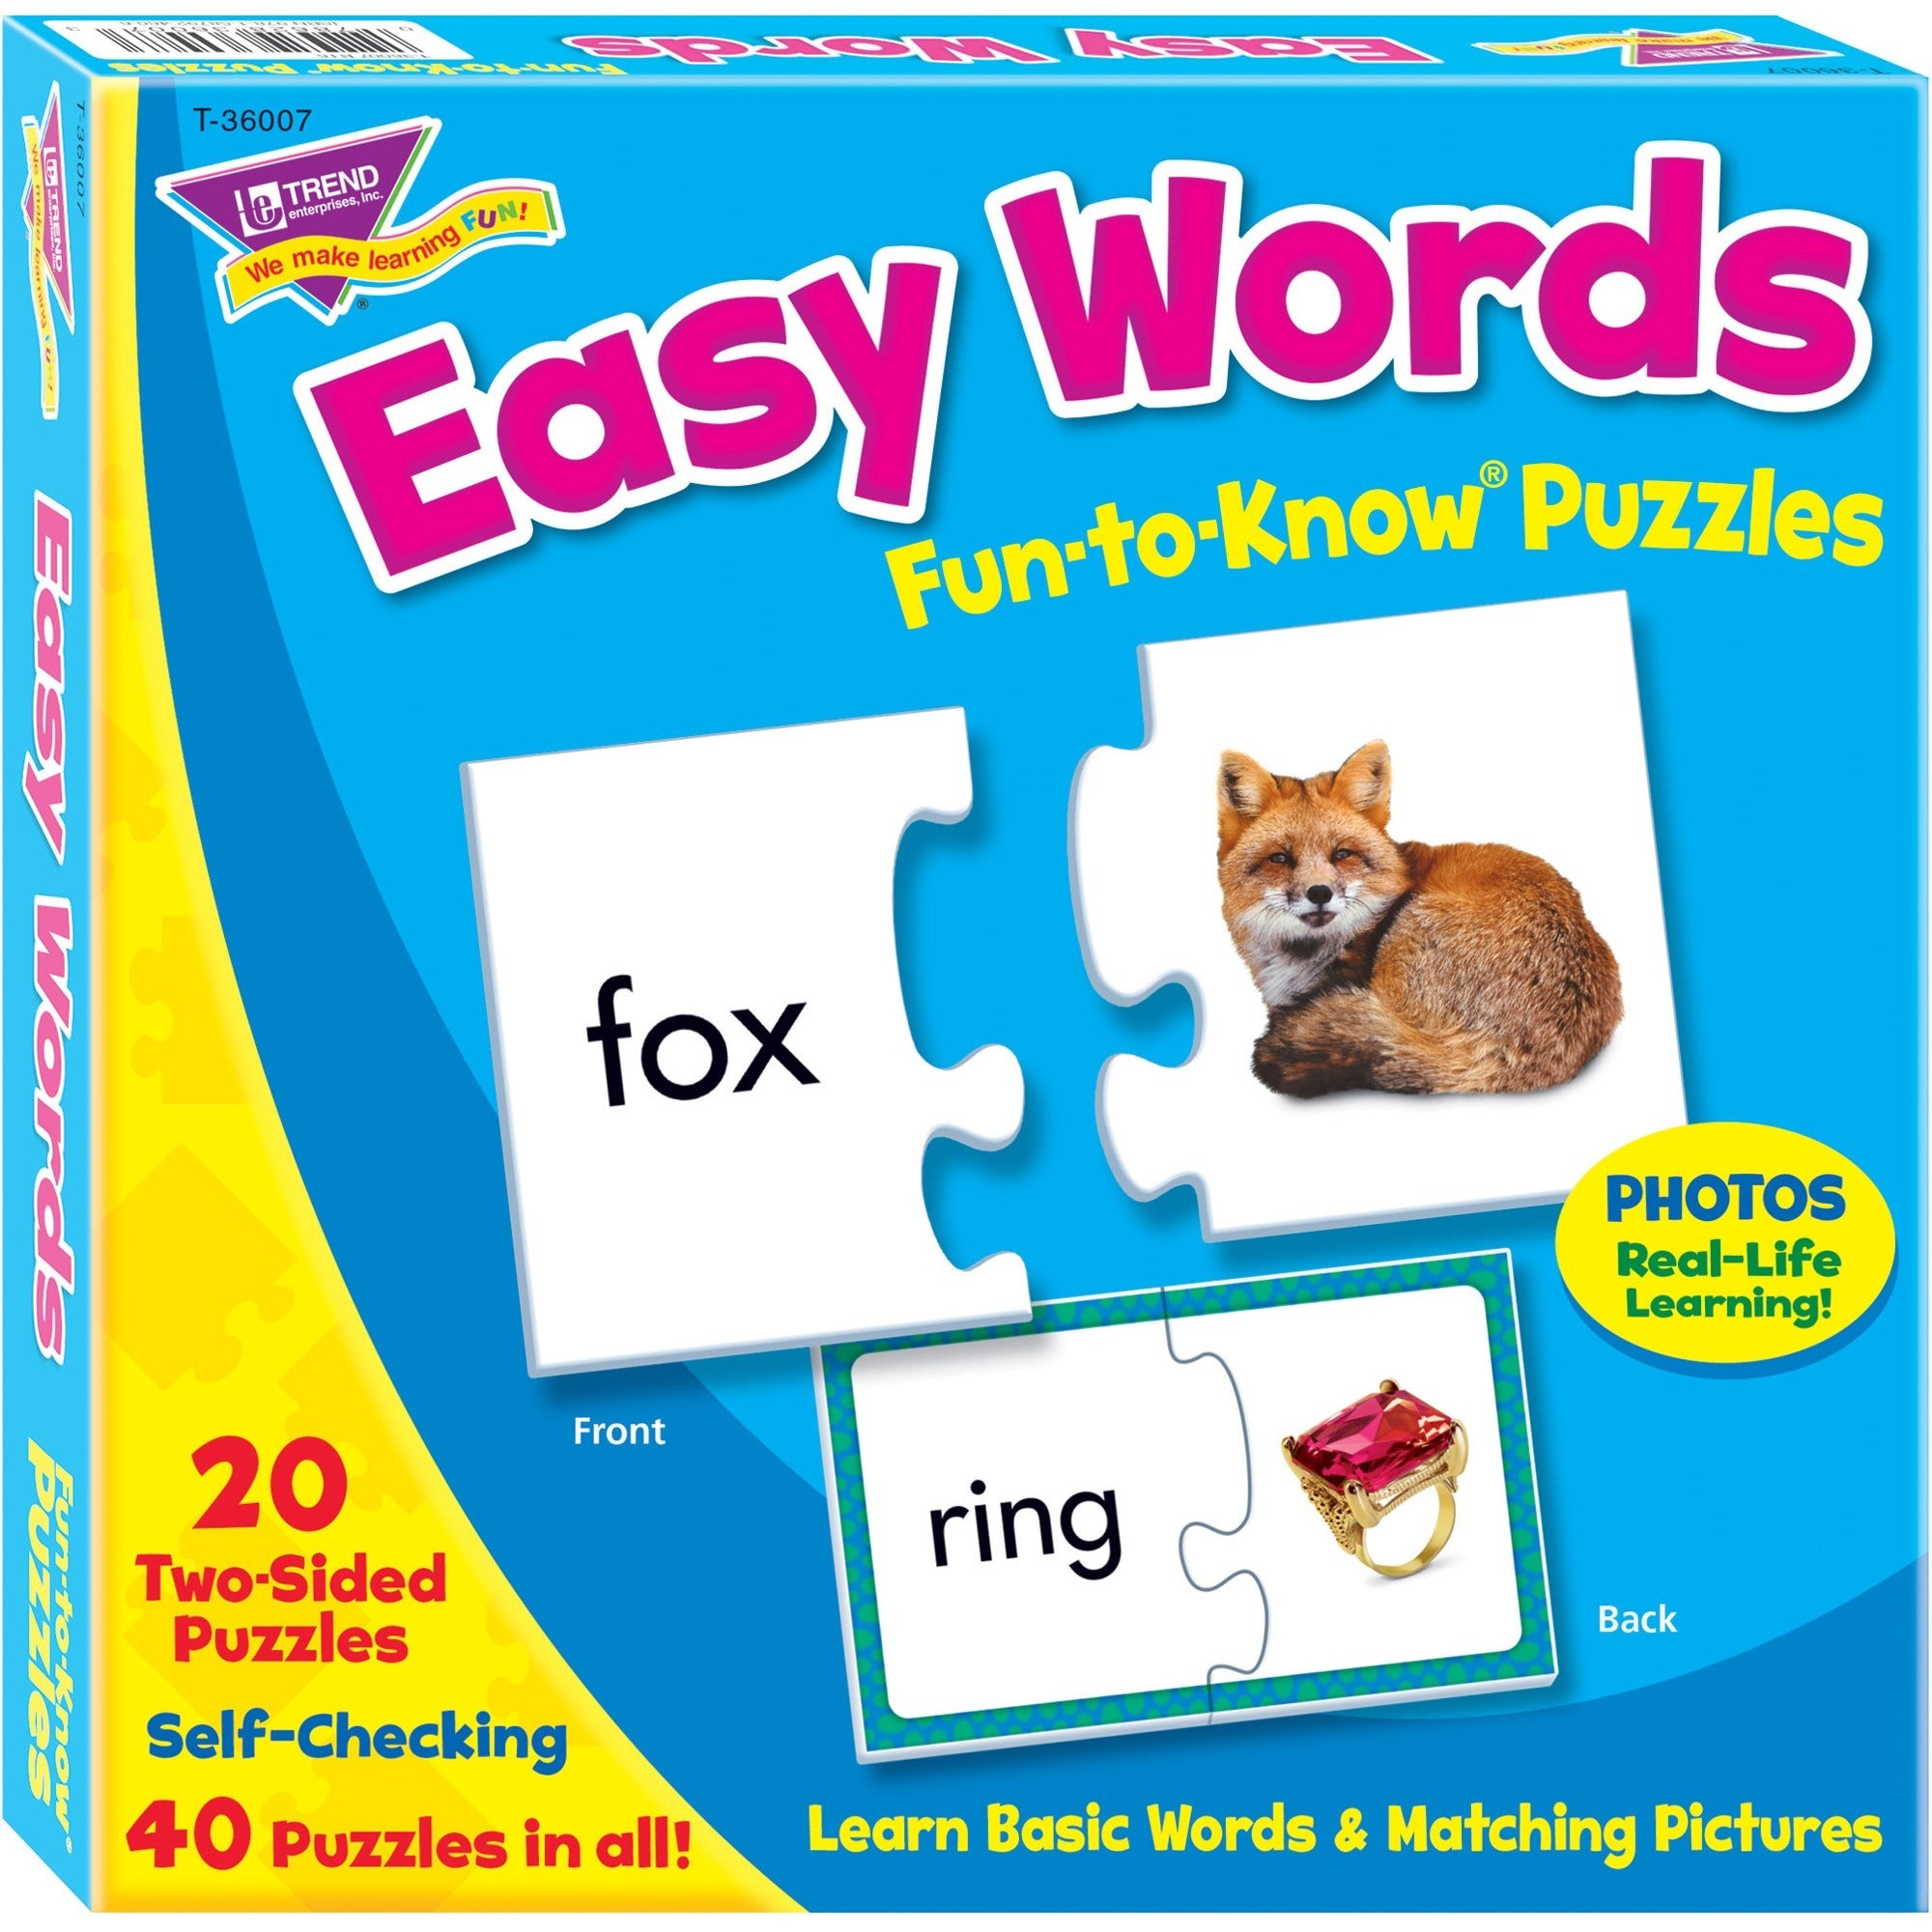 trend-easy-words-fun-to-know-puzzles-40-piece_tept36007 - 1